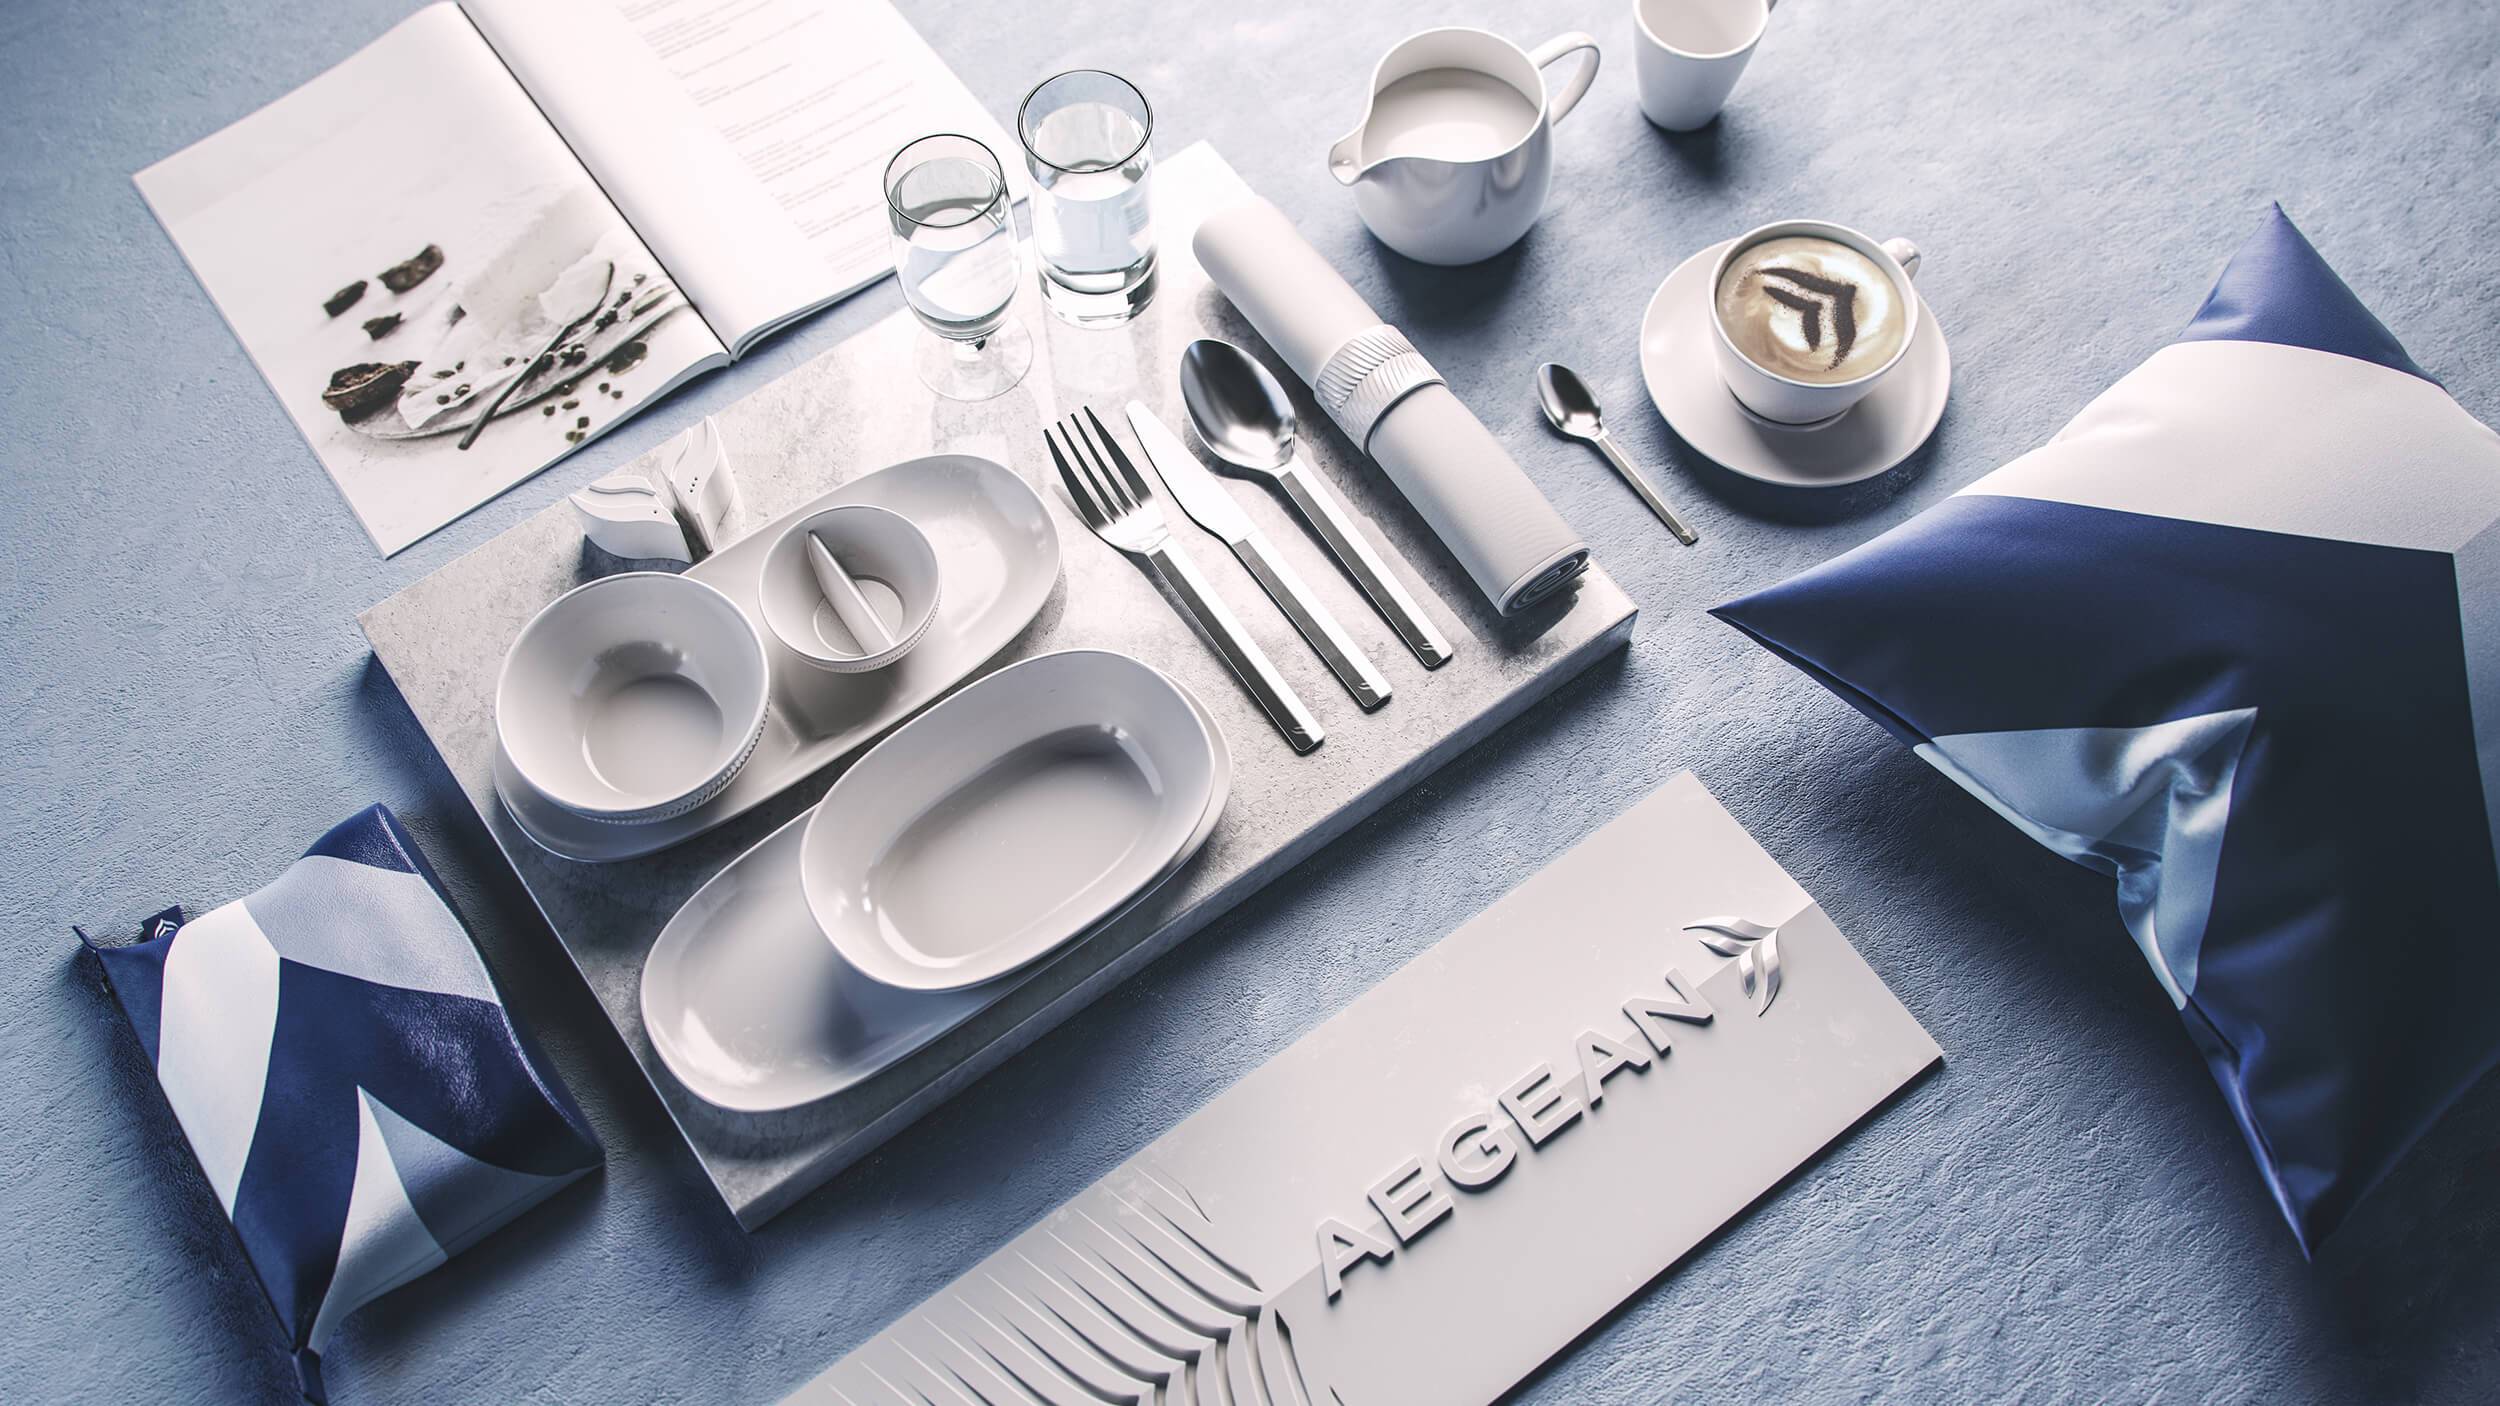 Overhead shot of the Aegean Airlines service items, including a branded amenity kit, branded cushion and meal items. An Aegean 3D brand panel features beneath, and the food menu above